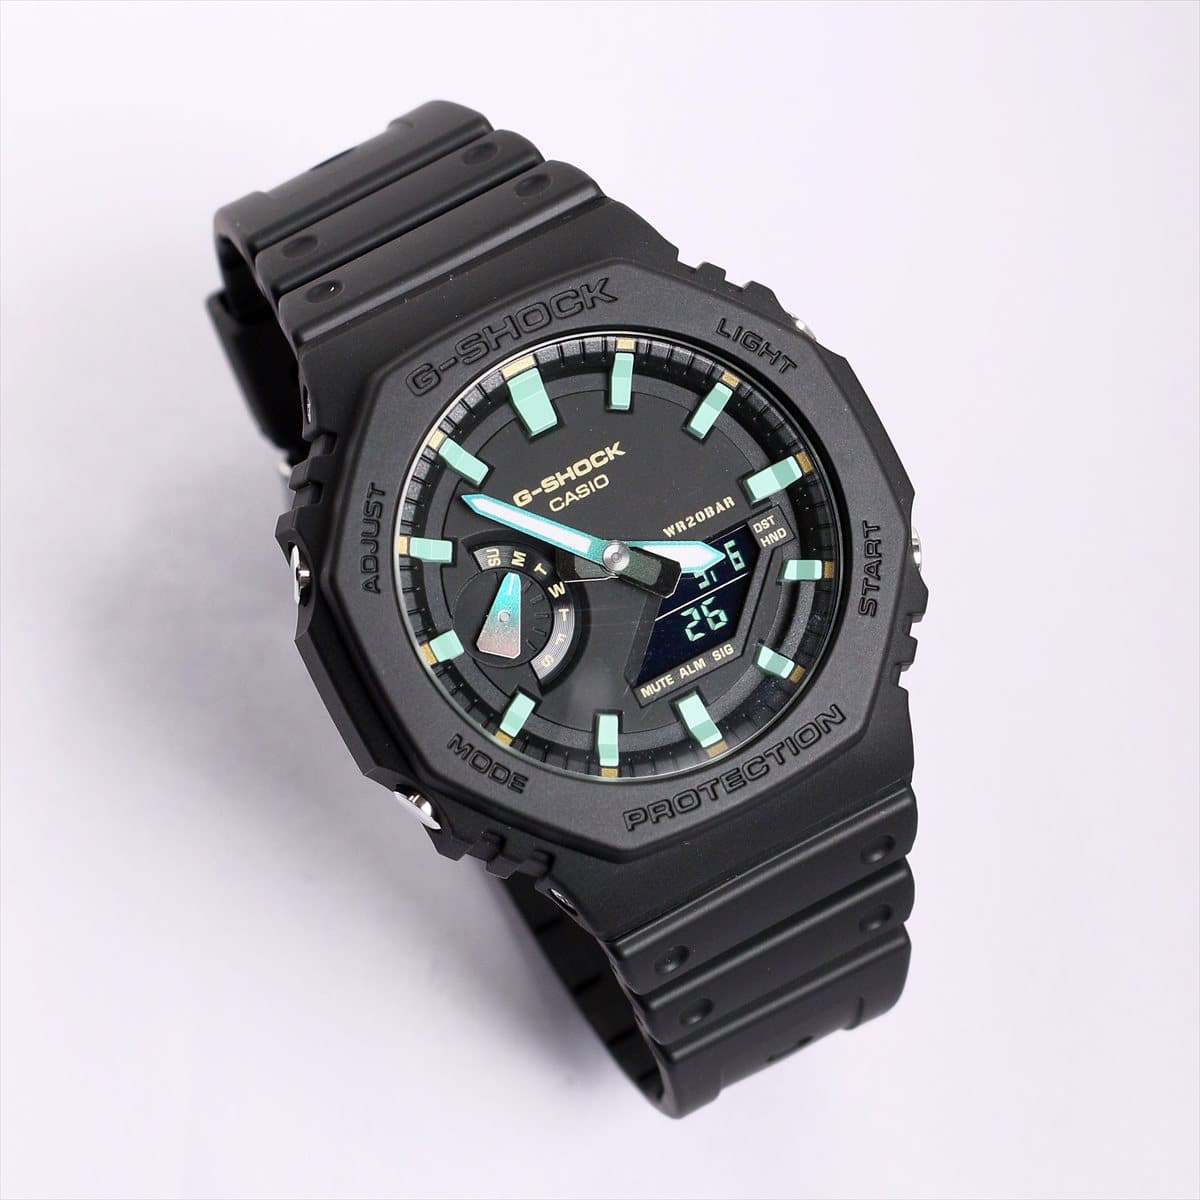 [New]Casio G-Shock GA-2100RC-1AJF TEAL AND BROWN COLOR series CASIO G